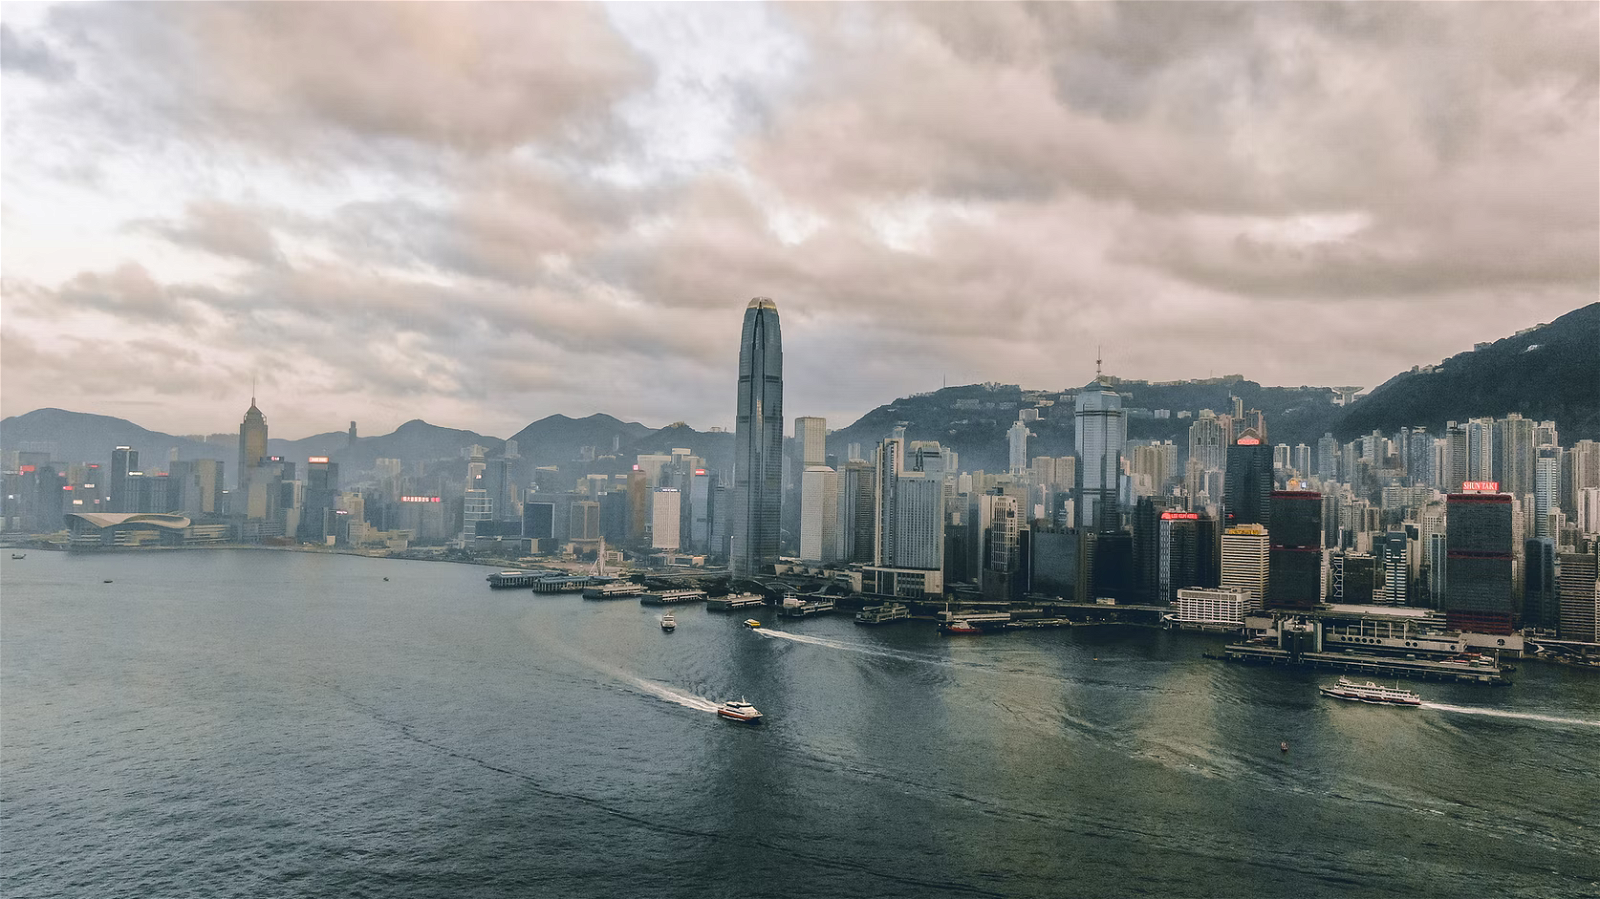 Hong Kong needs better preparedness to adapting to climate change